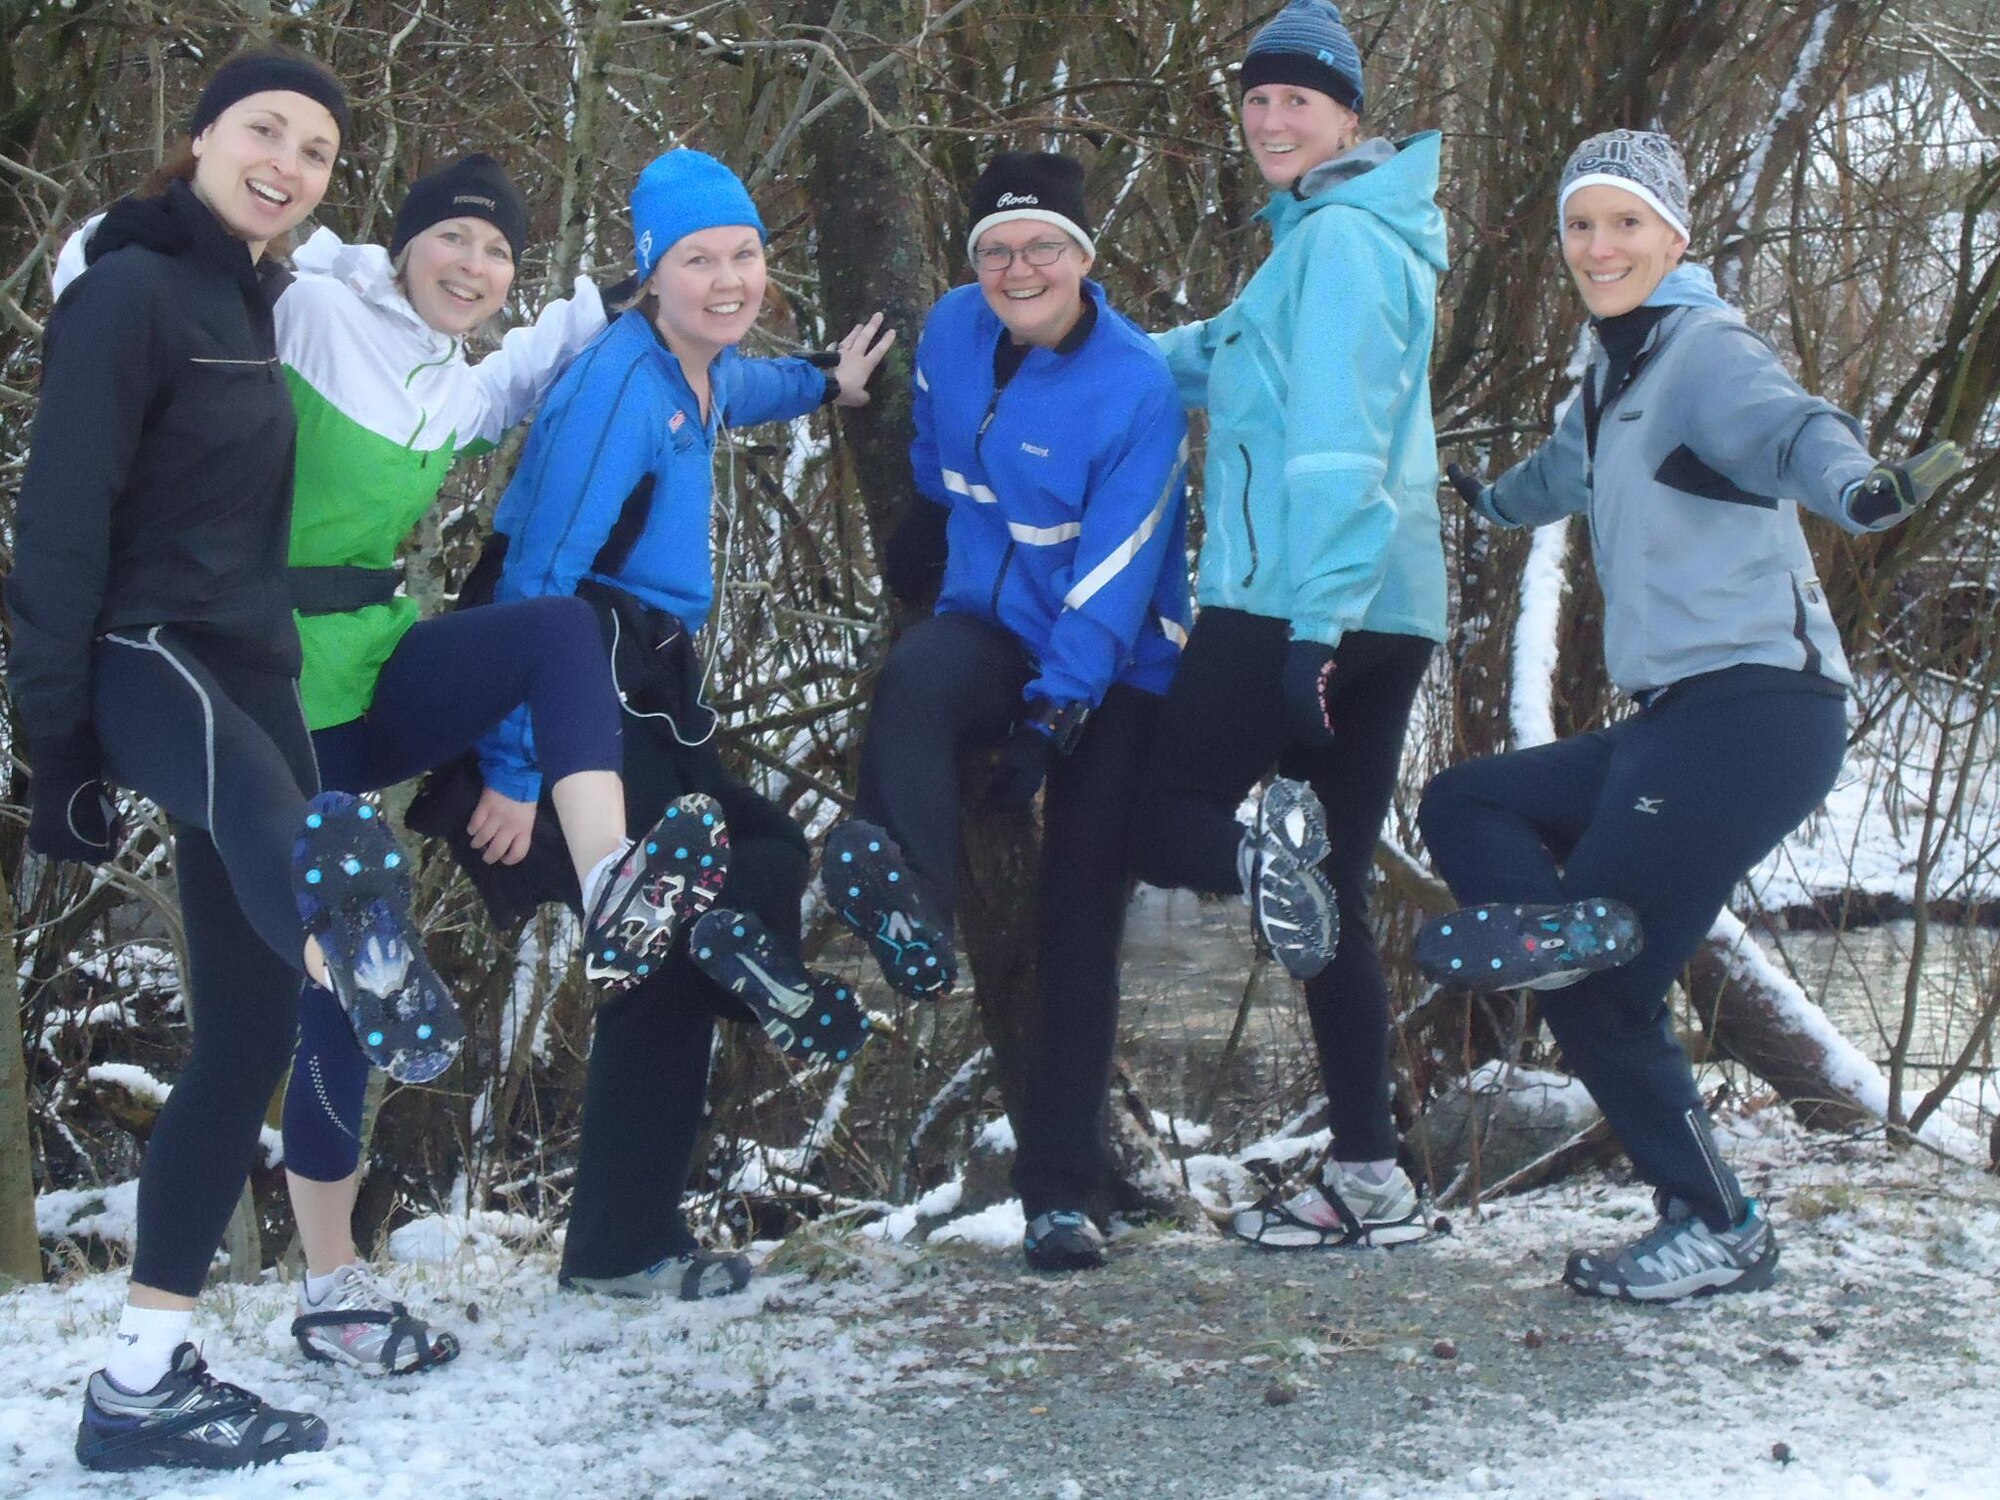 Running group in winter.